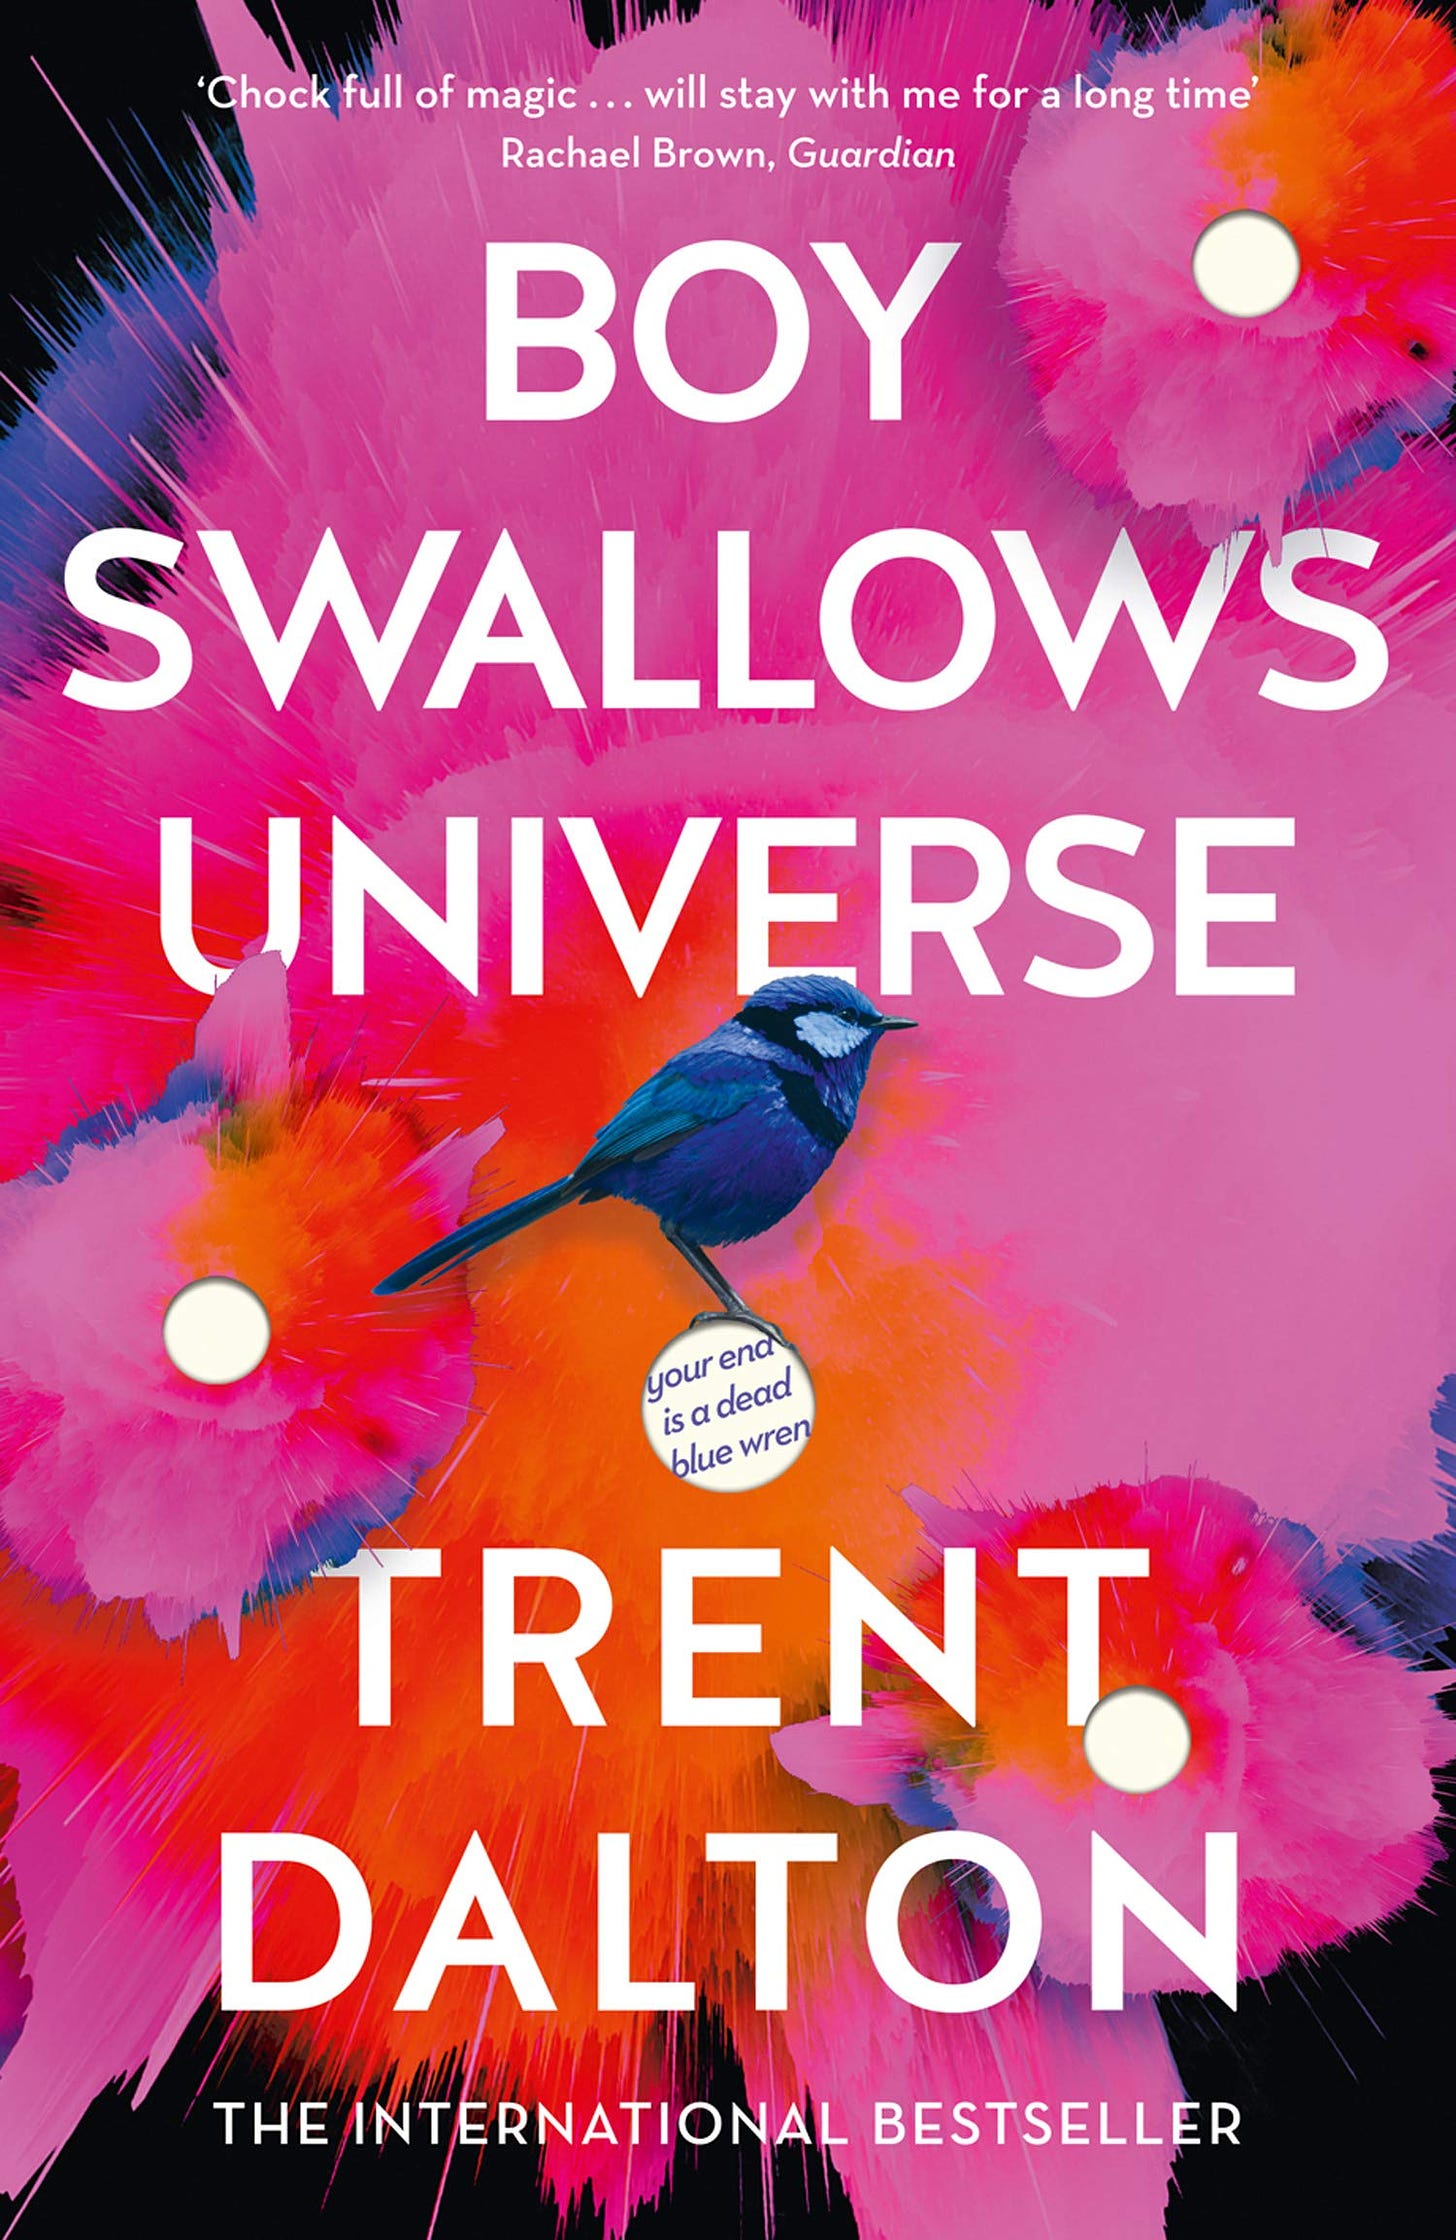 The book cover of “Boy Swallows Universe” by Trent Dalton